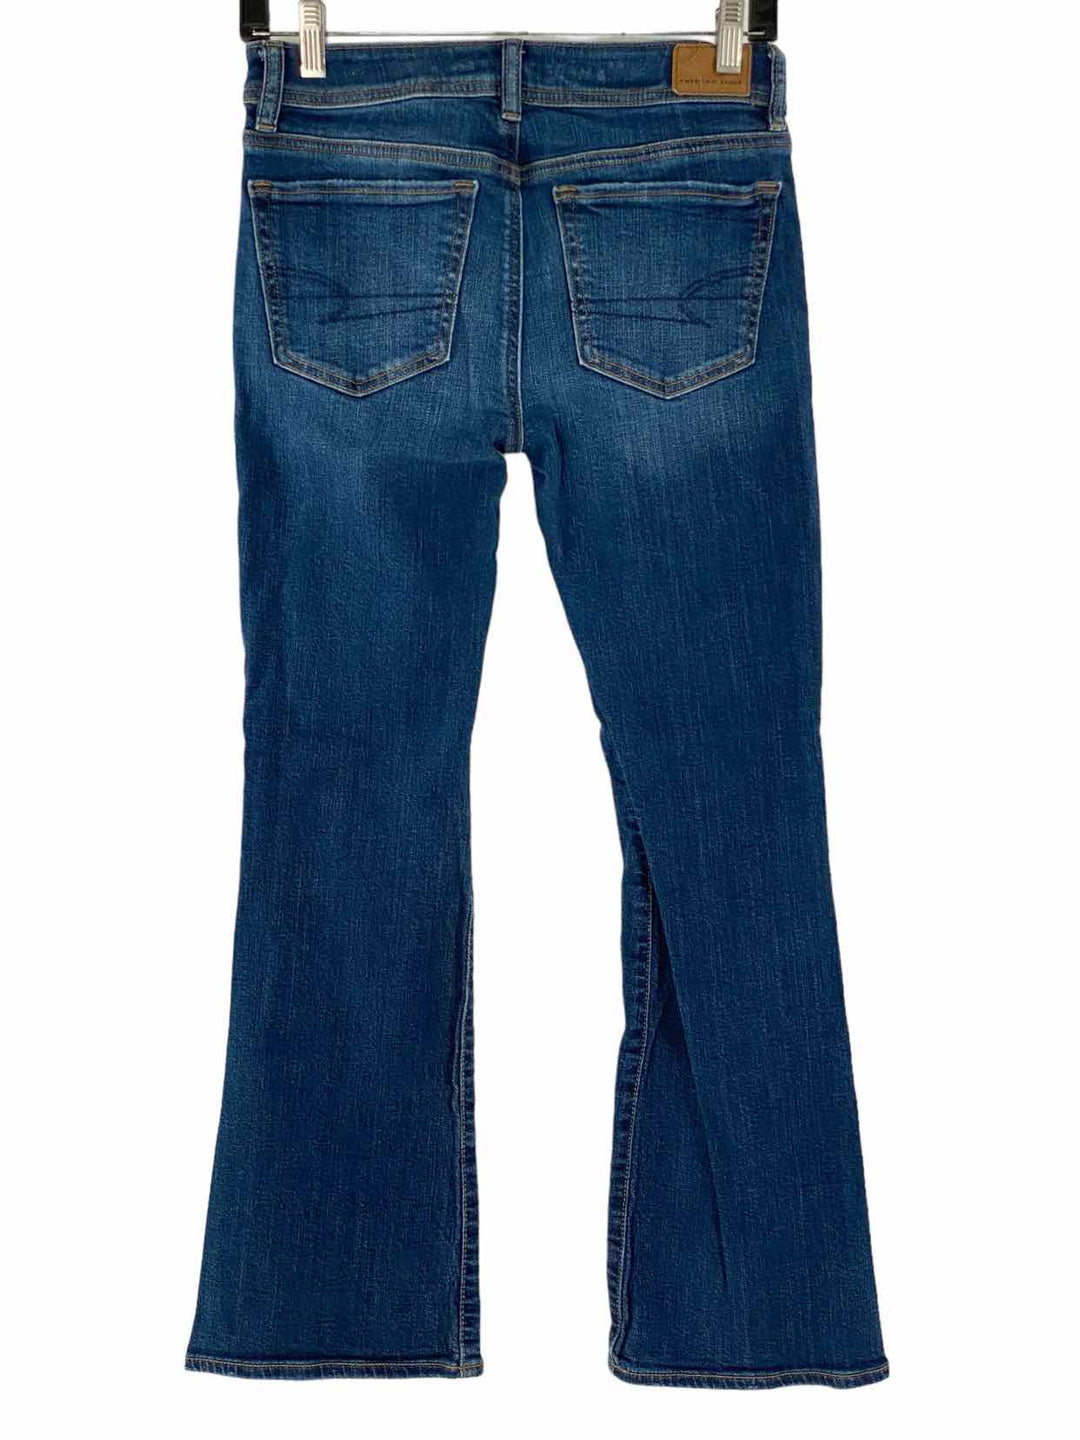 American Eagle Size 4 Jeans